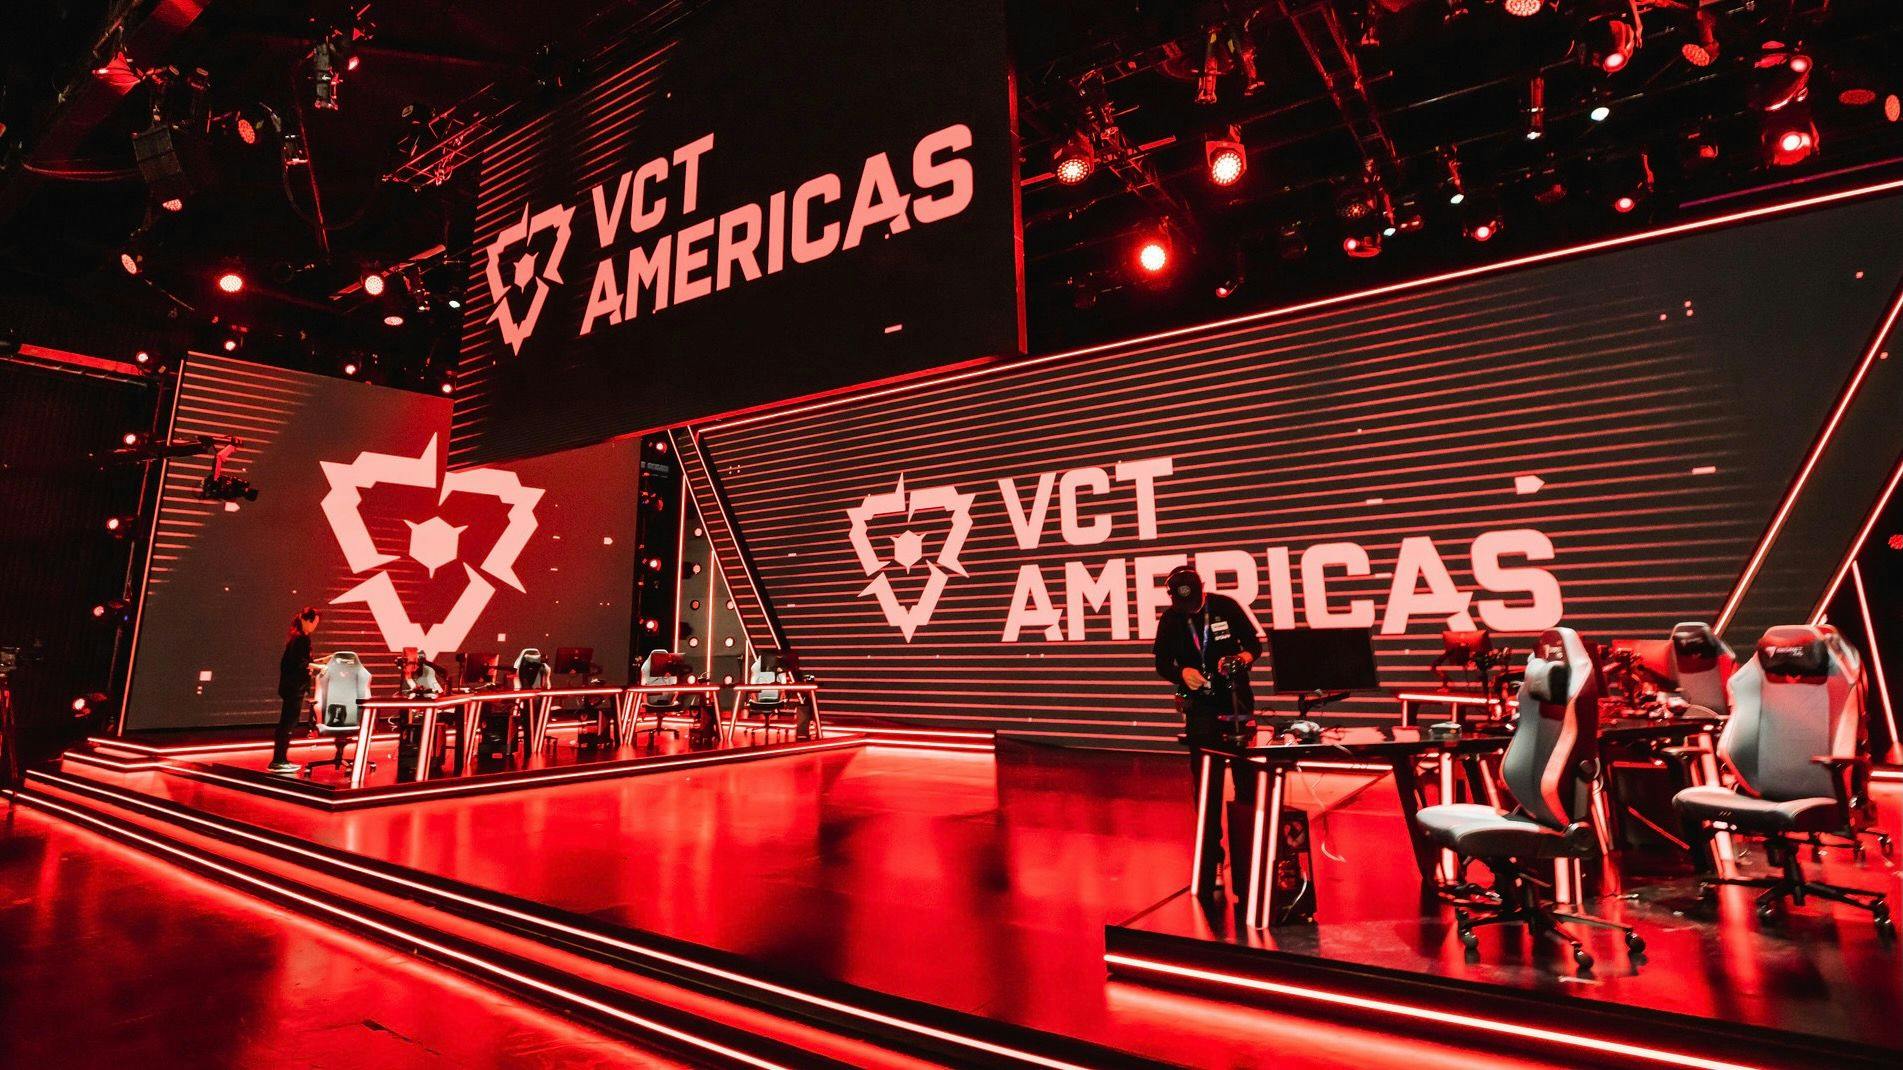 VCT Americas betting